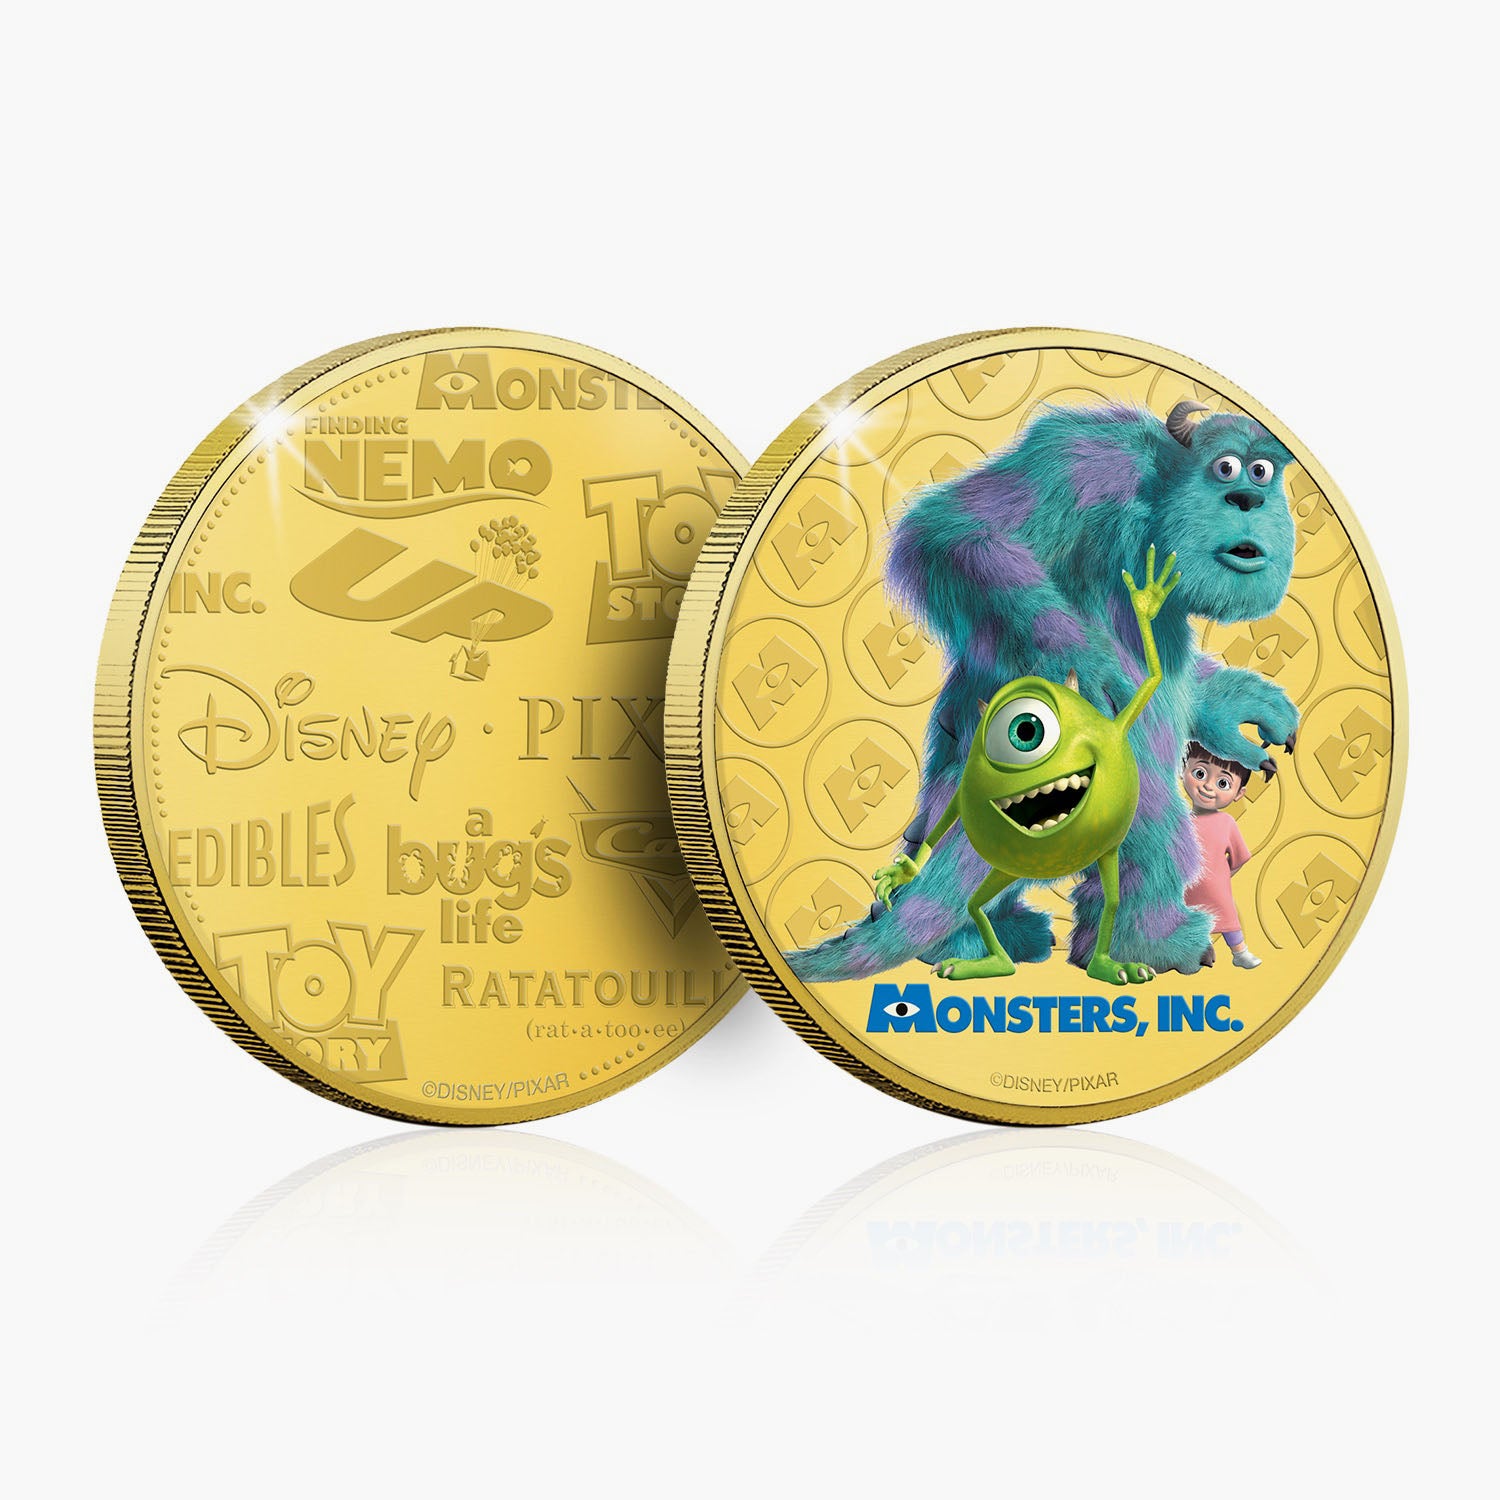 Monsters, Inc. Gold-Plated Commemorative